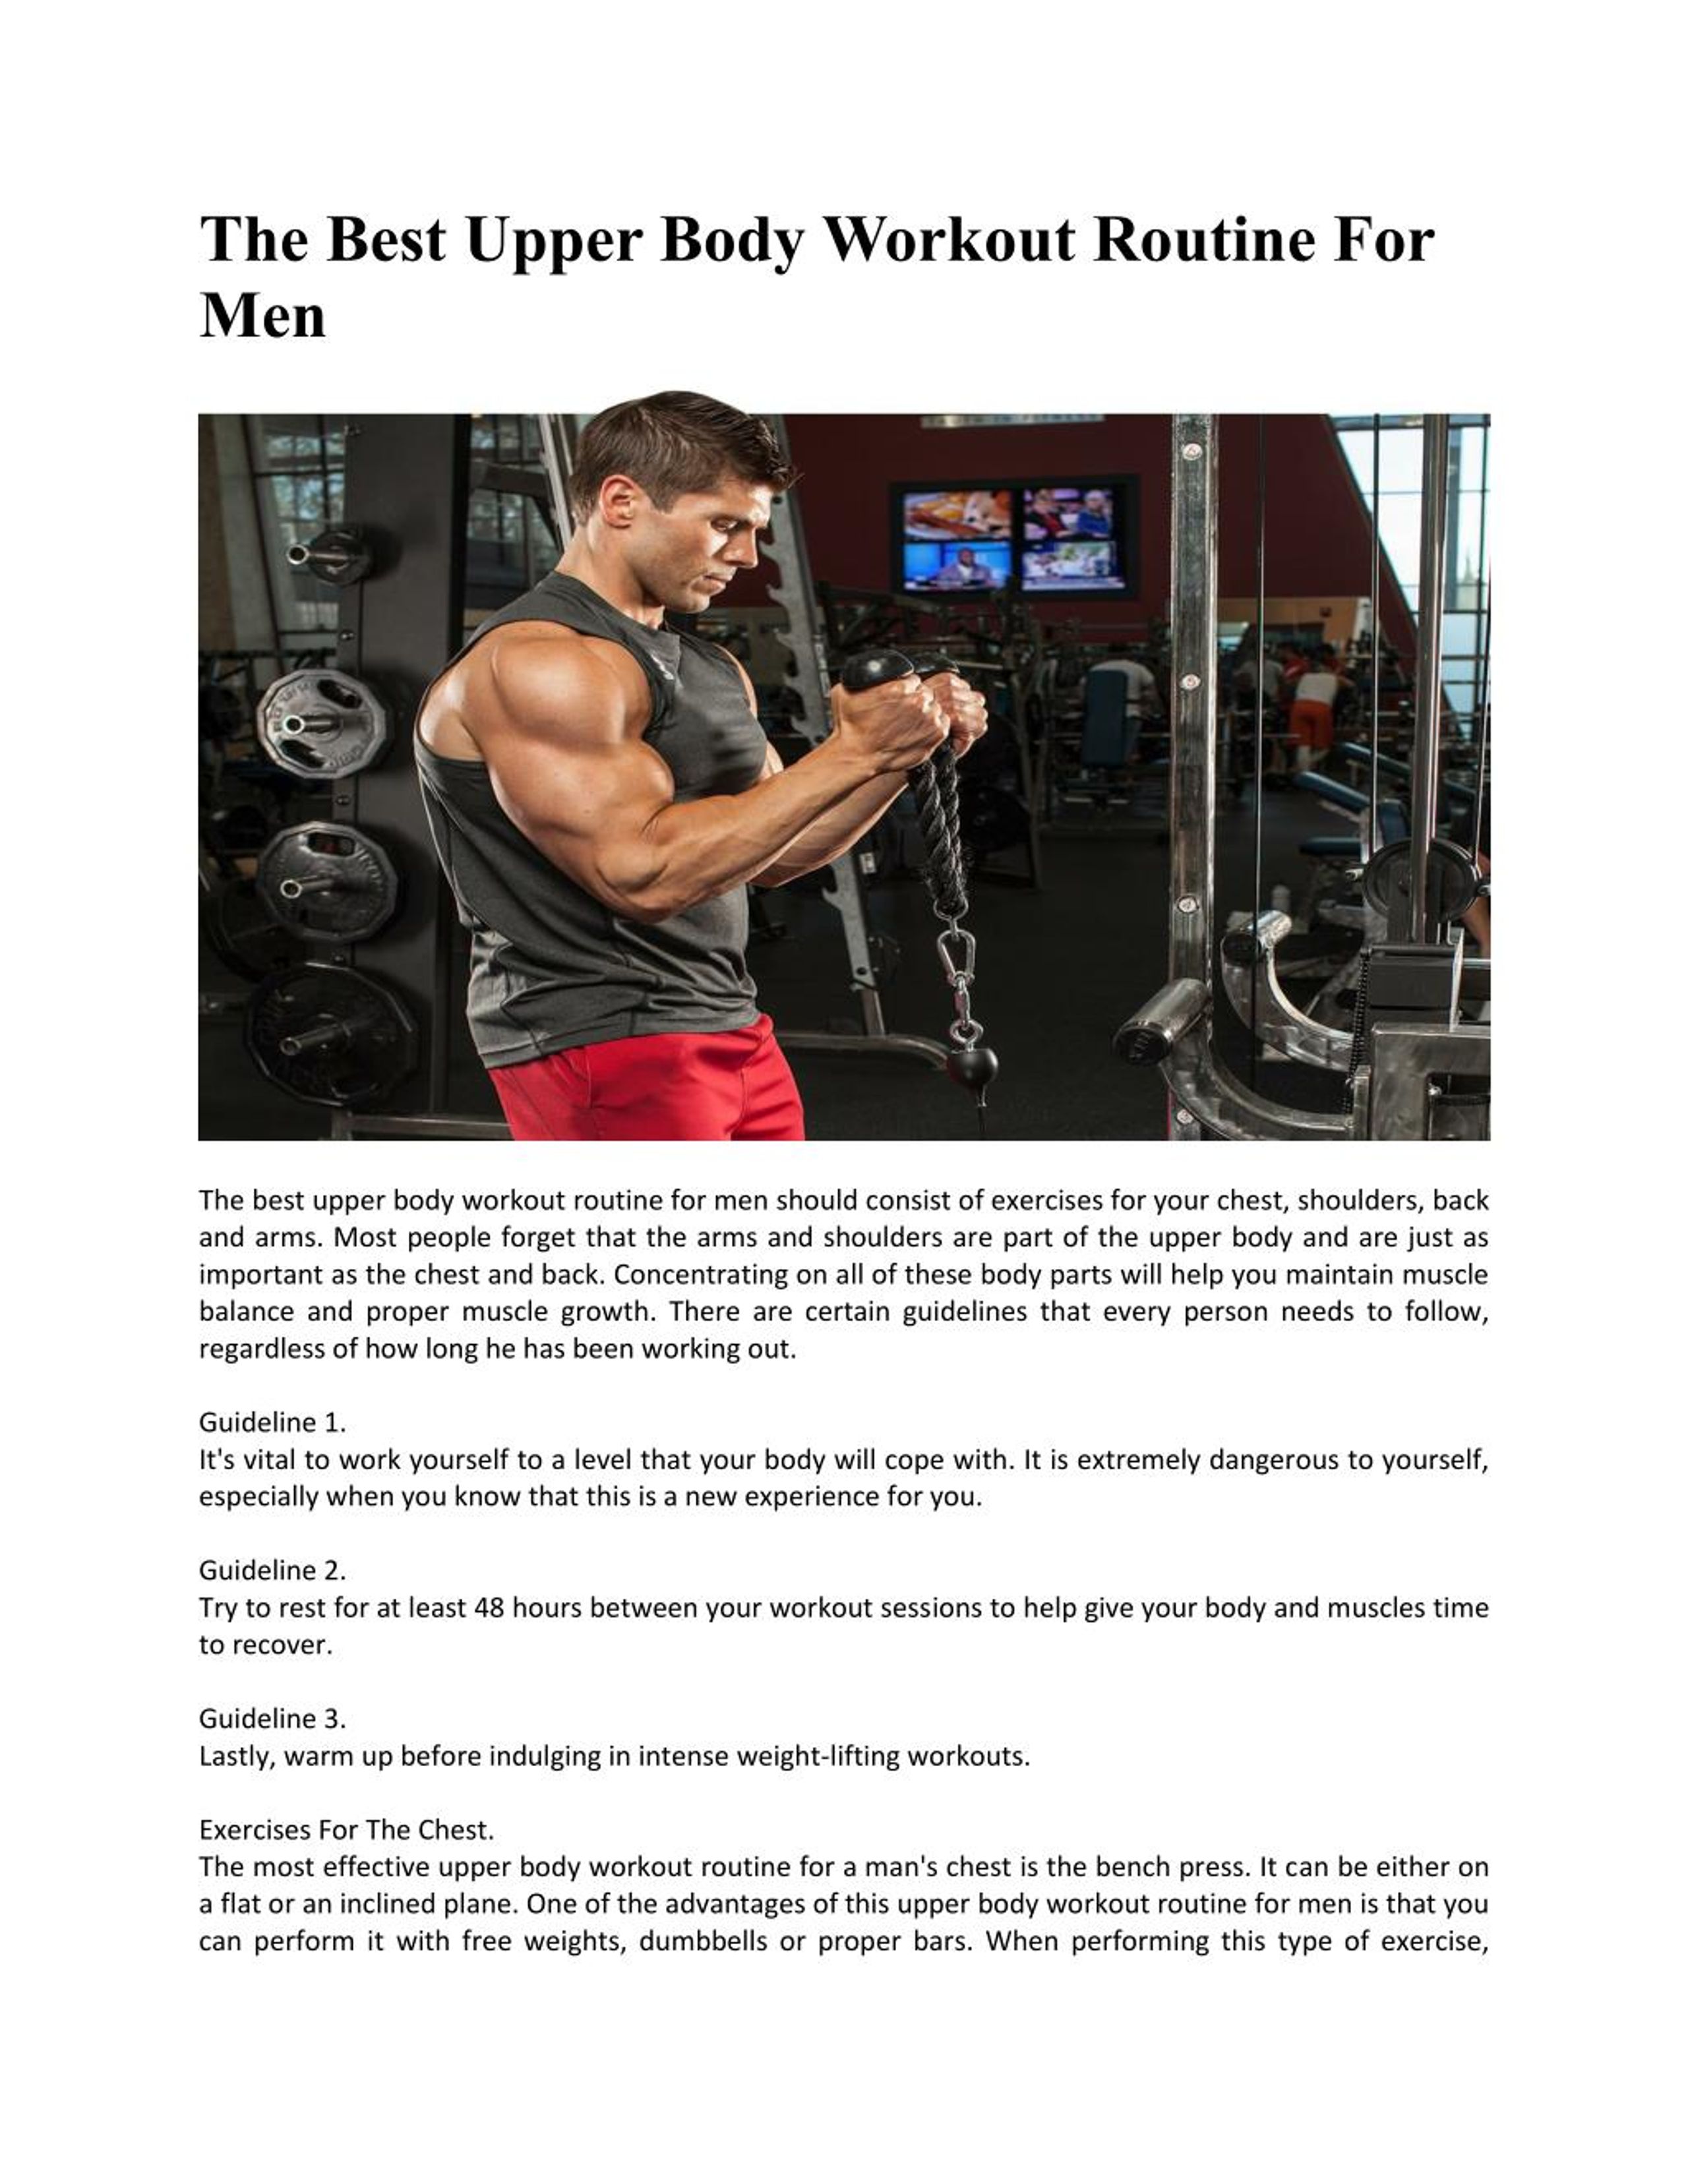 Chest Workout Routine for Both Men and Women